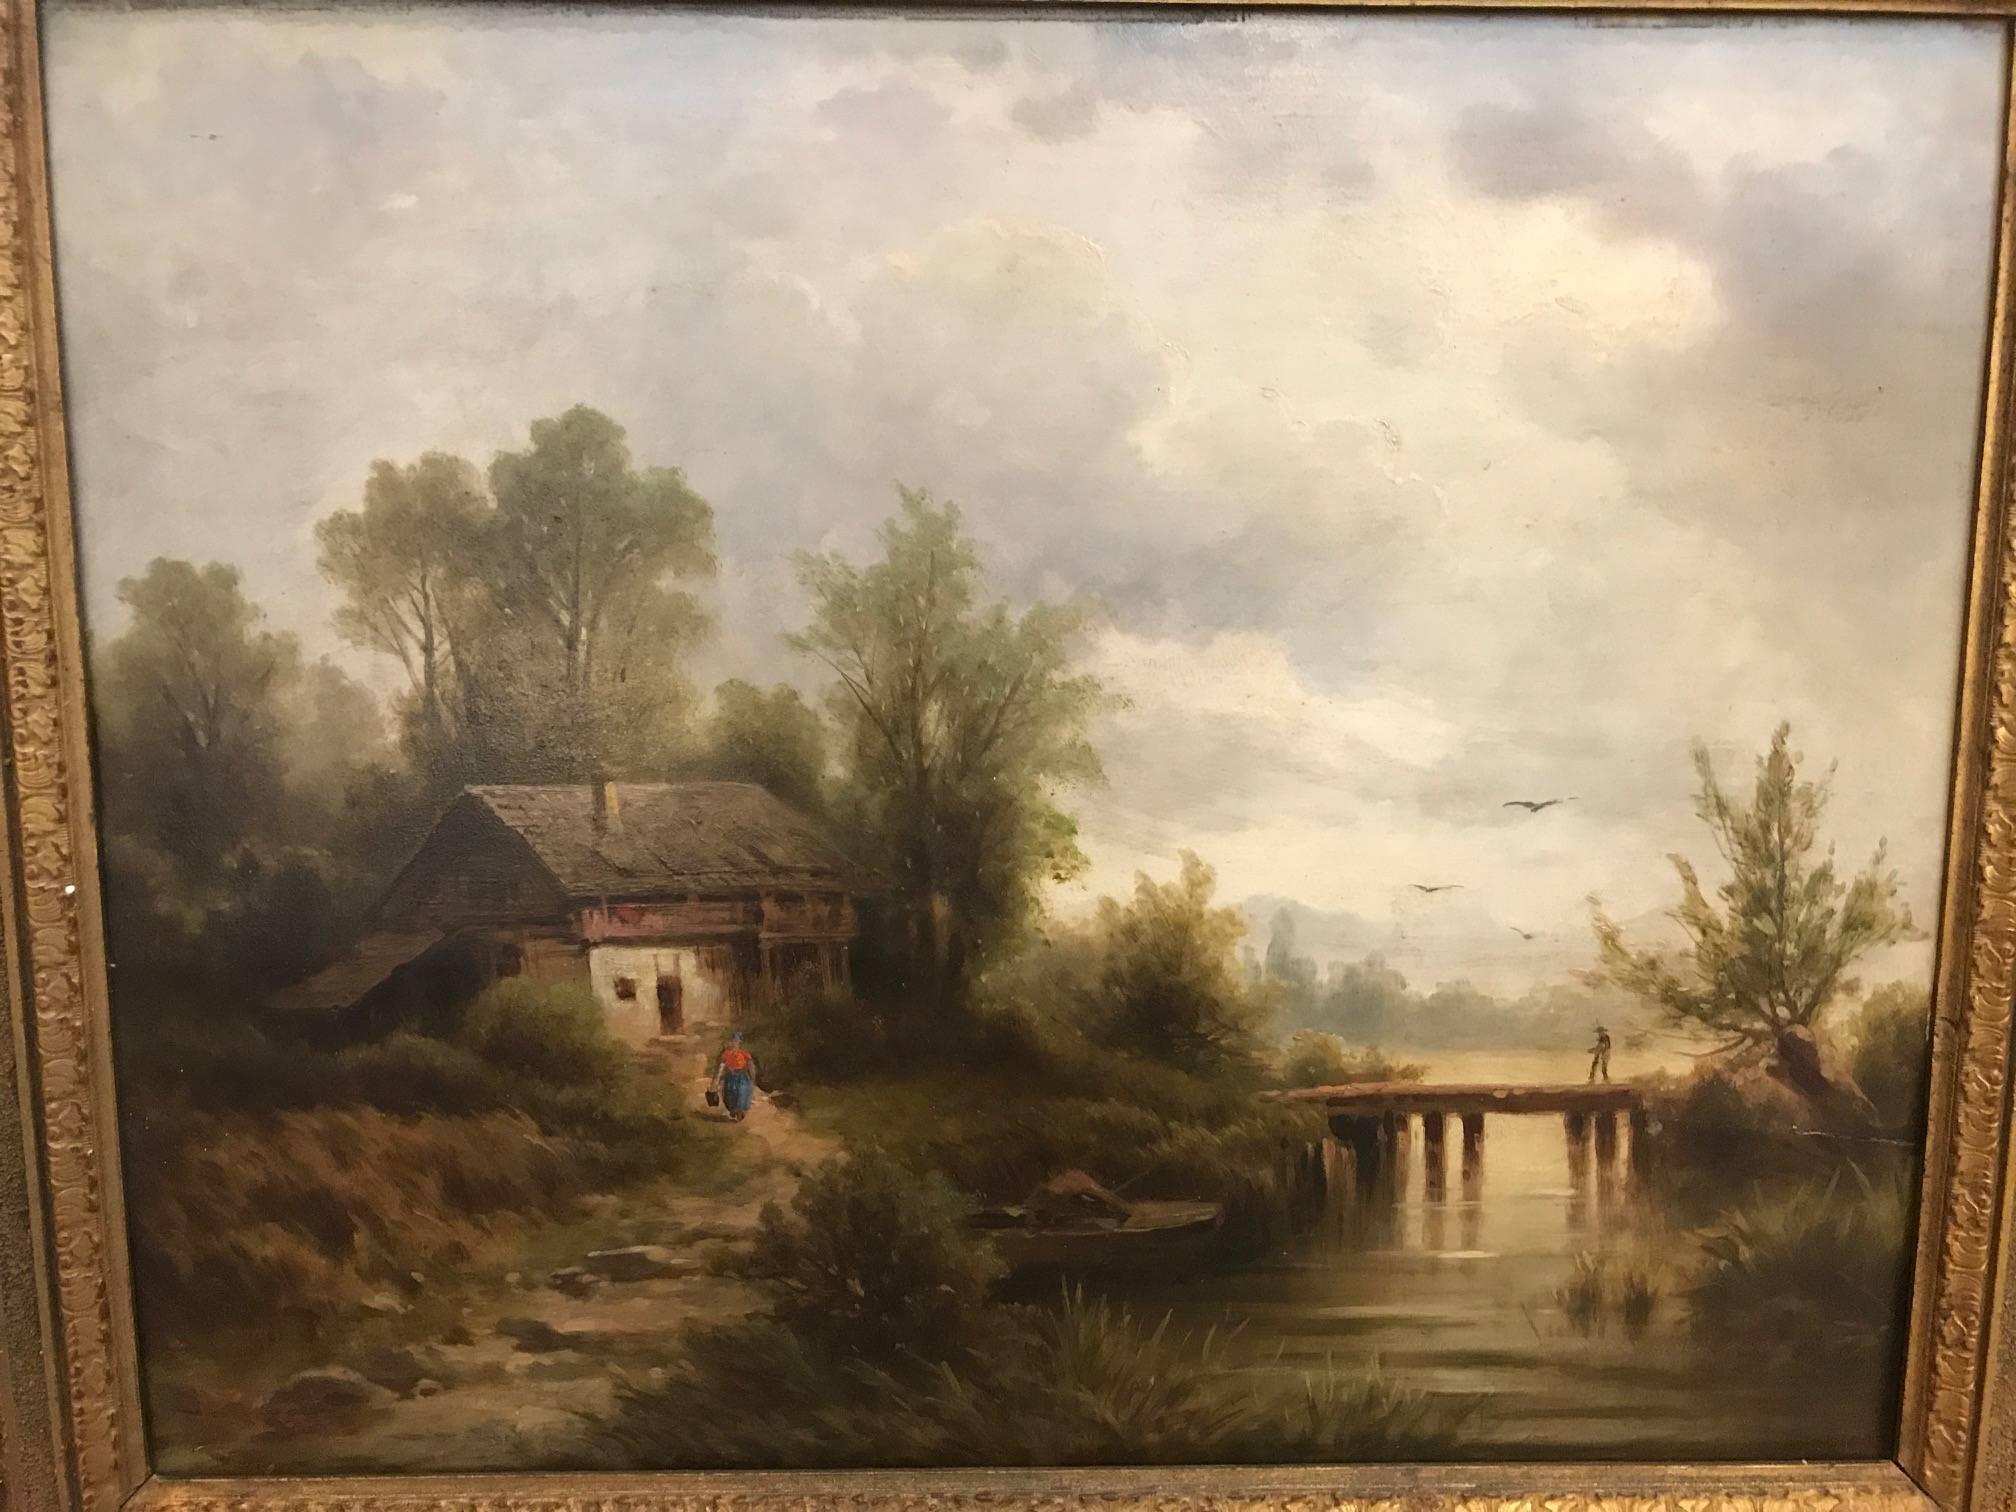 Oil painting on board of a bucolic scene in original giltwood frame. Artist signed A. Pickert, Germany (1876-1941) Anton Pickert was know for his calming landscape bucolic scenes and is a listed European artist.  
Unframed 20.5 by 16.5.